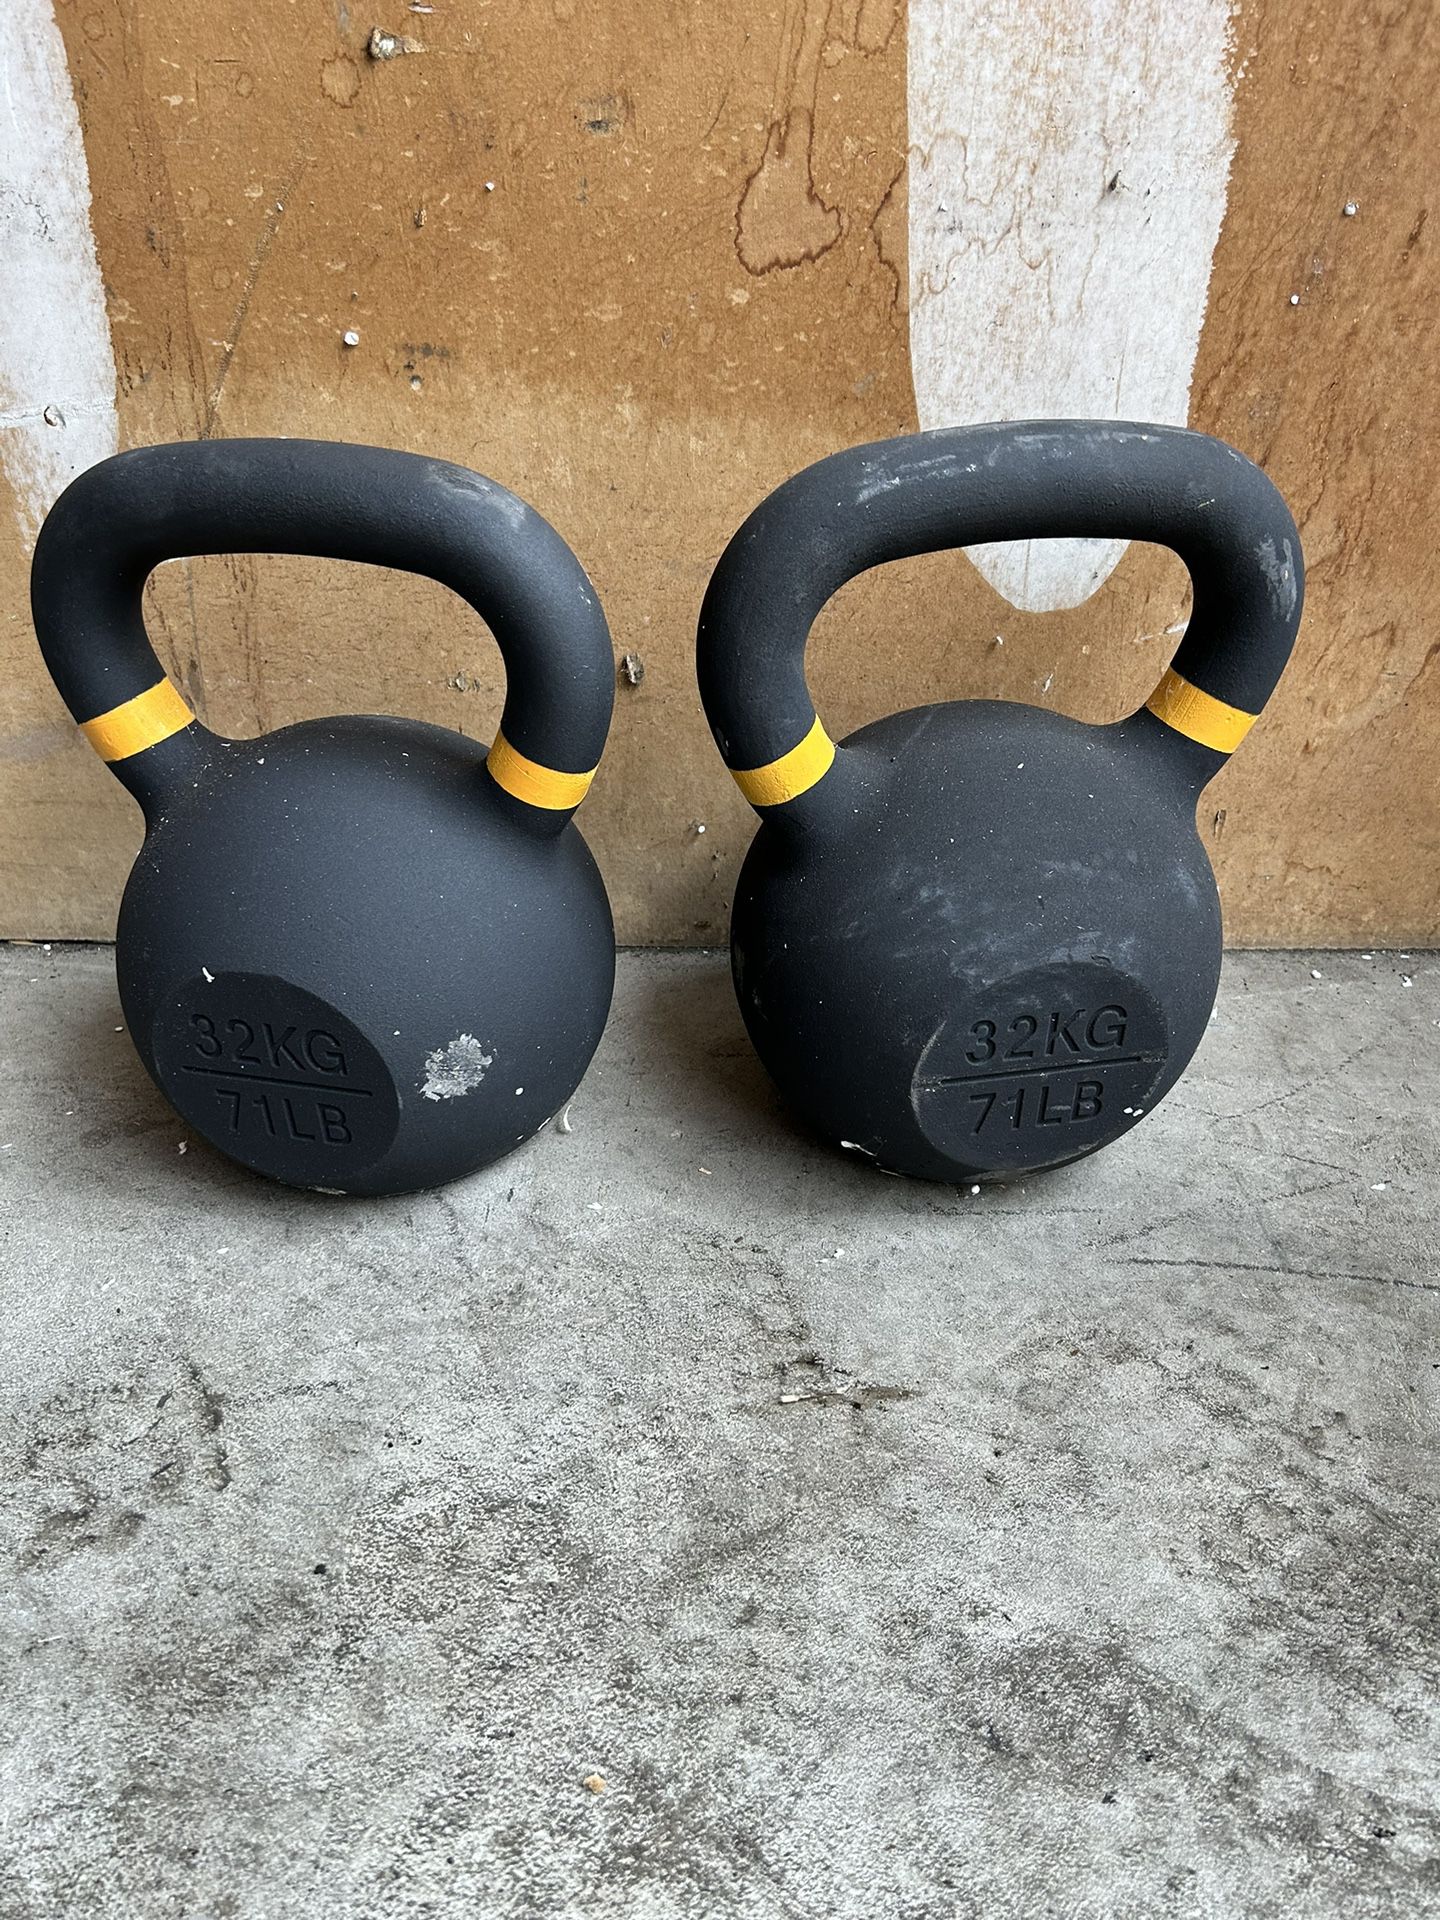 1 -71lLbs. X $90 Or 2 X $180 Used Kettlebells Firm Price.